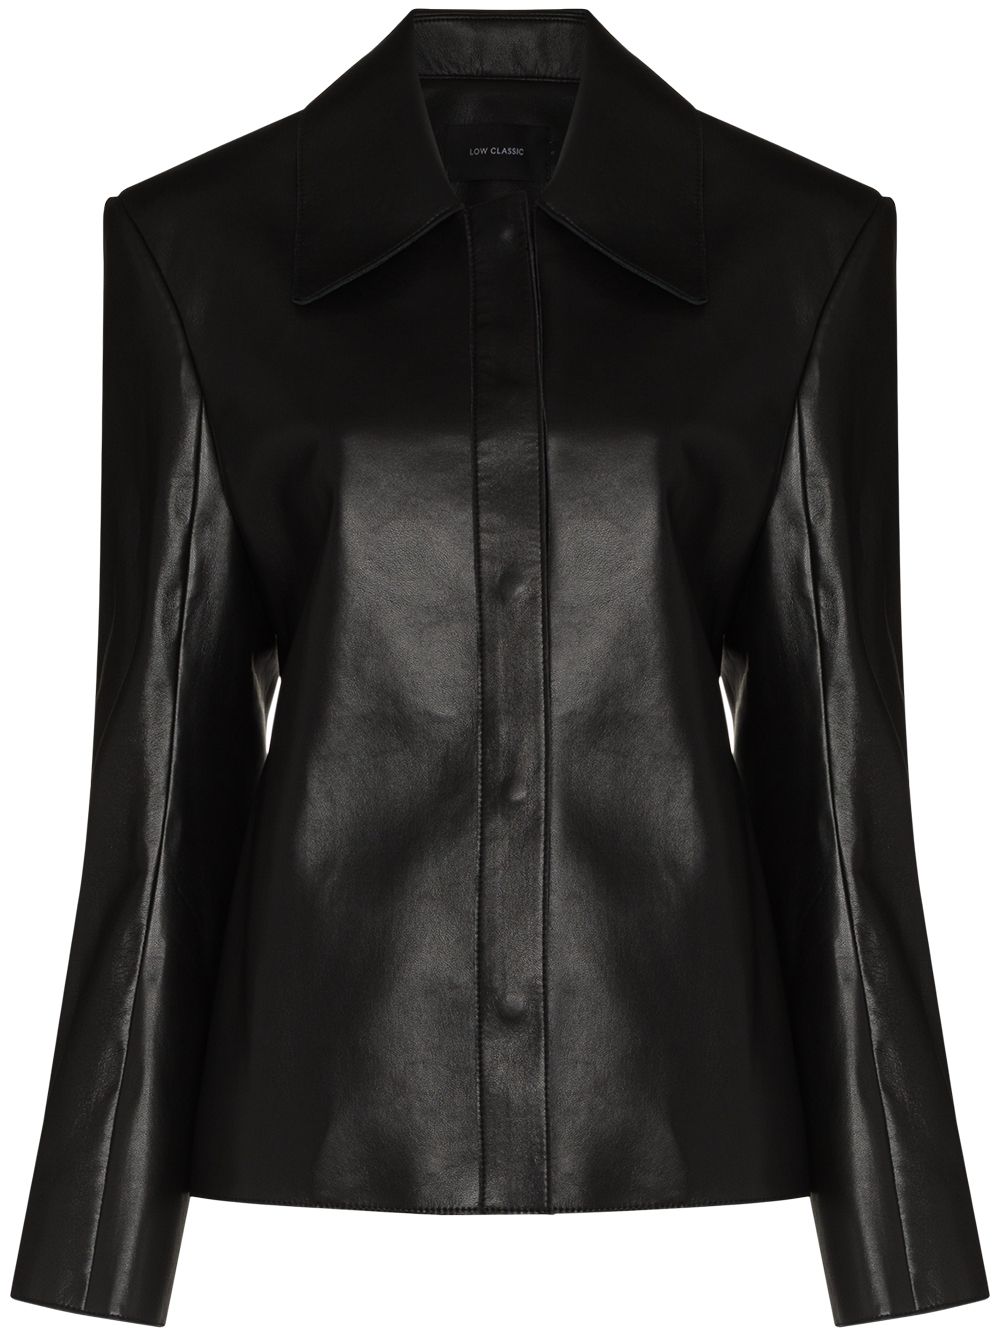 Low Classic recycled leather shirt - Black von Low Classic